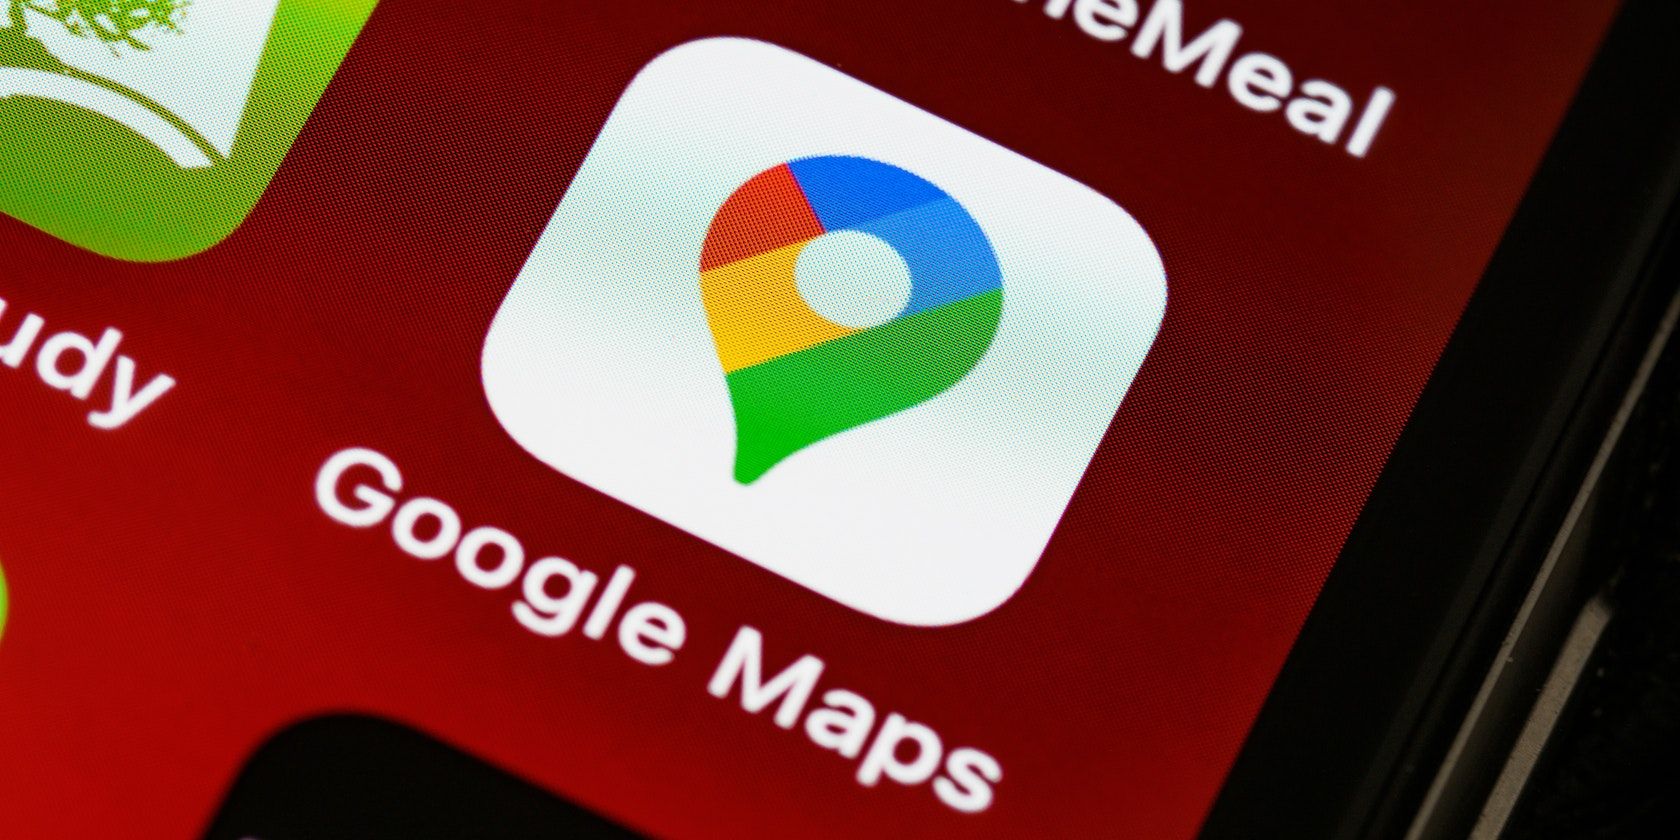 Google Maps app icon on a phone screen